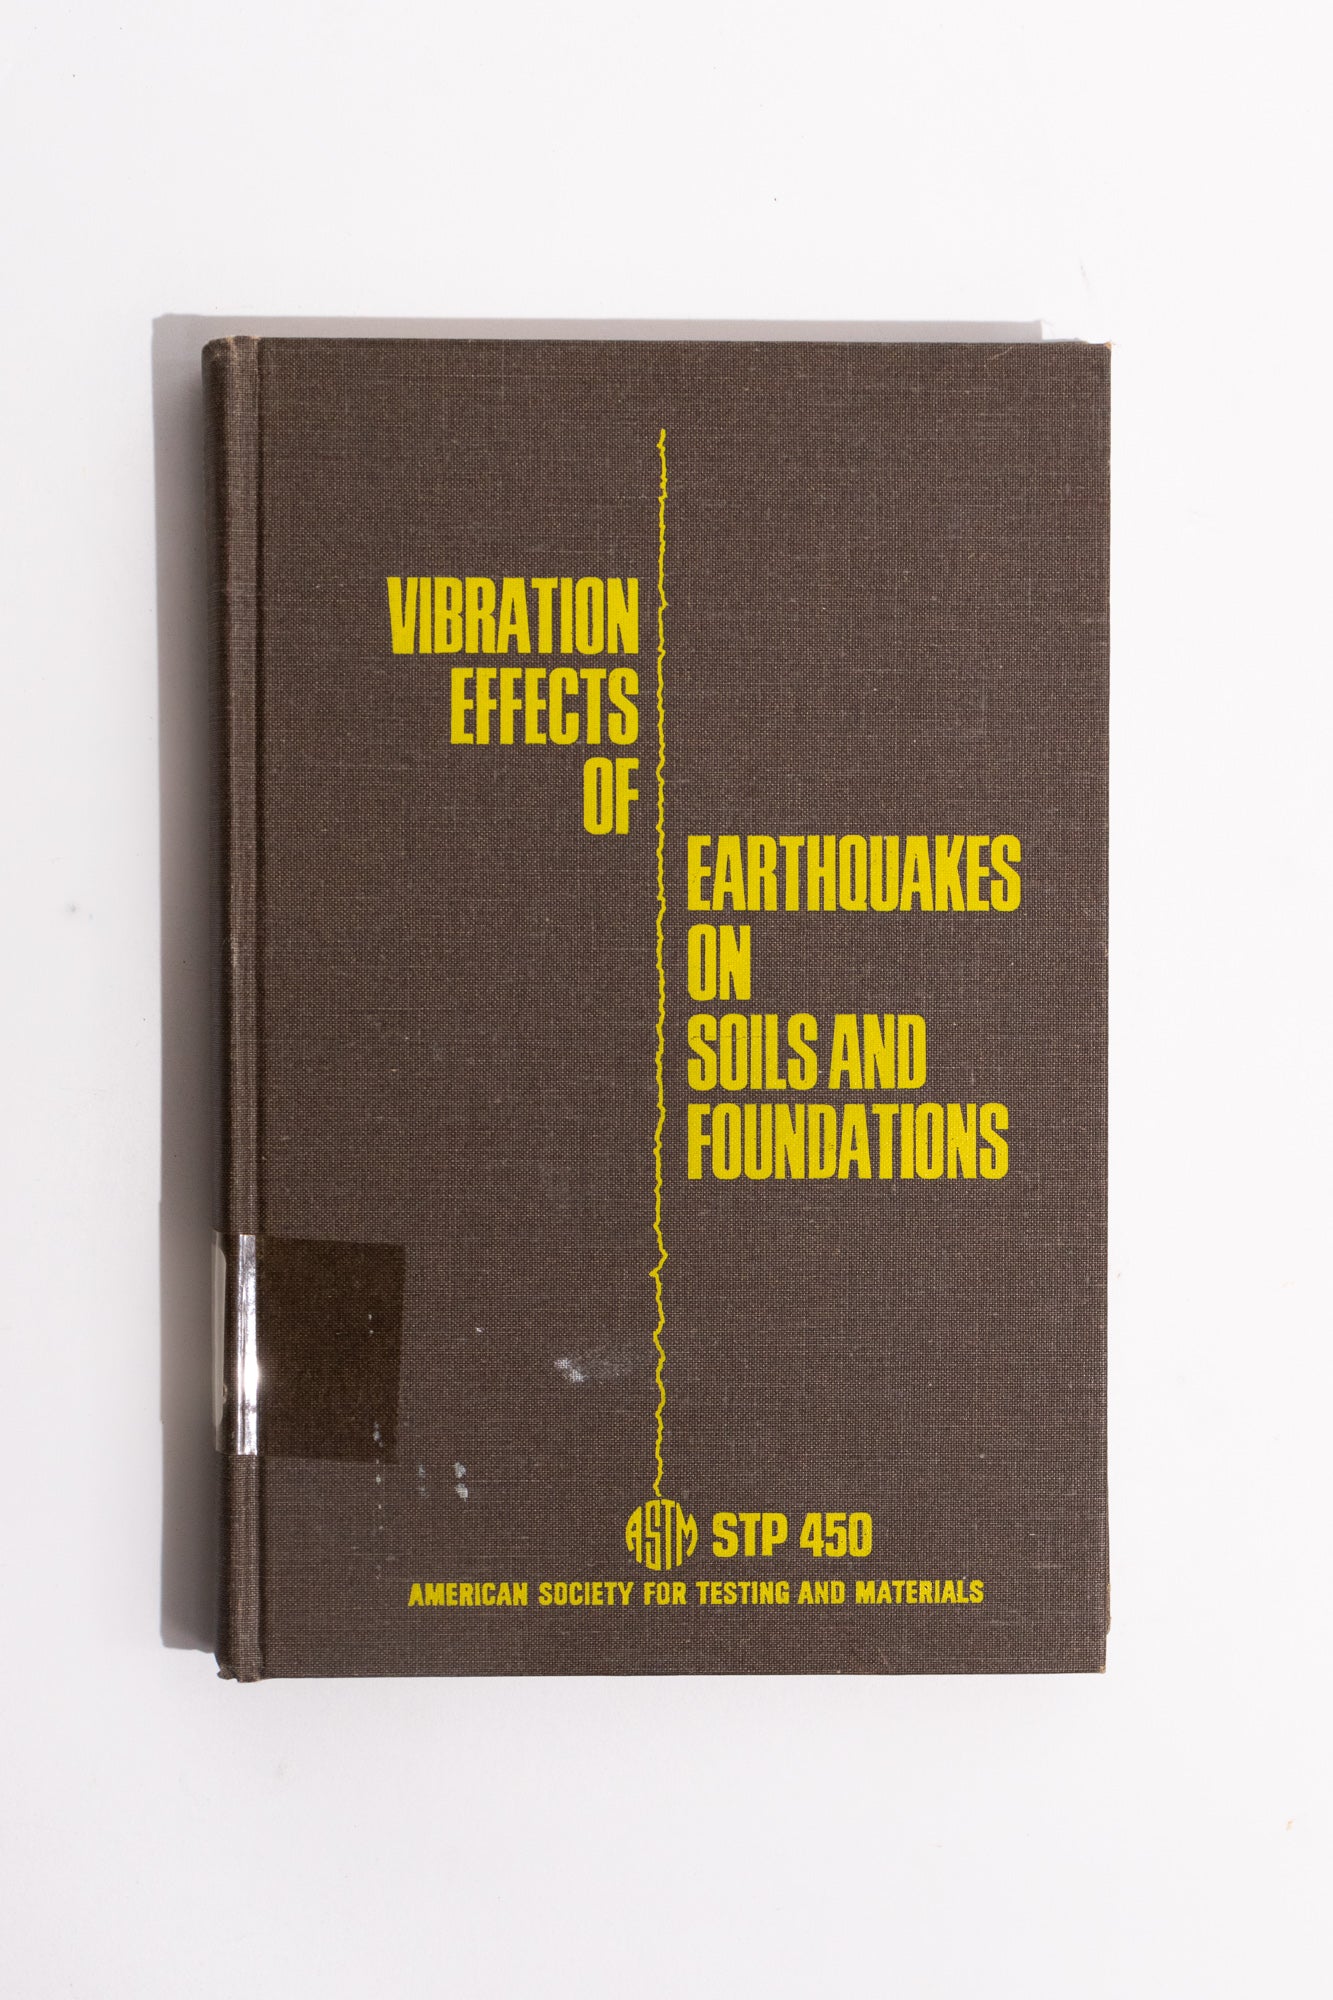 Vibration Effects of Earthquakes on Soils and Foundations